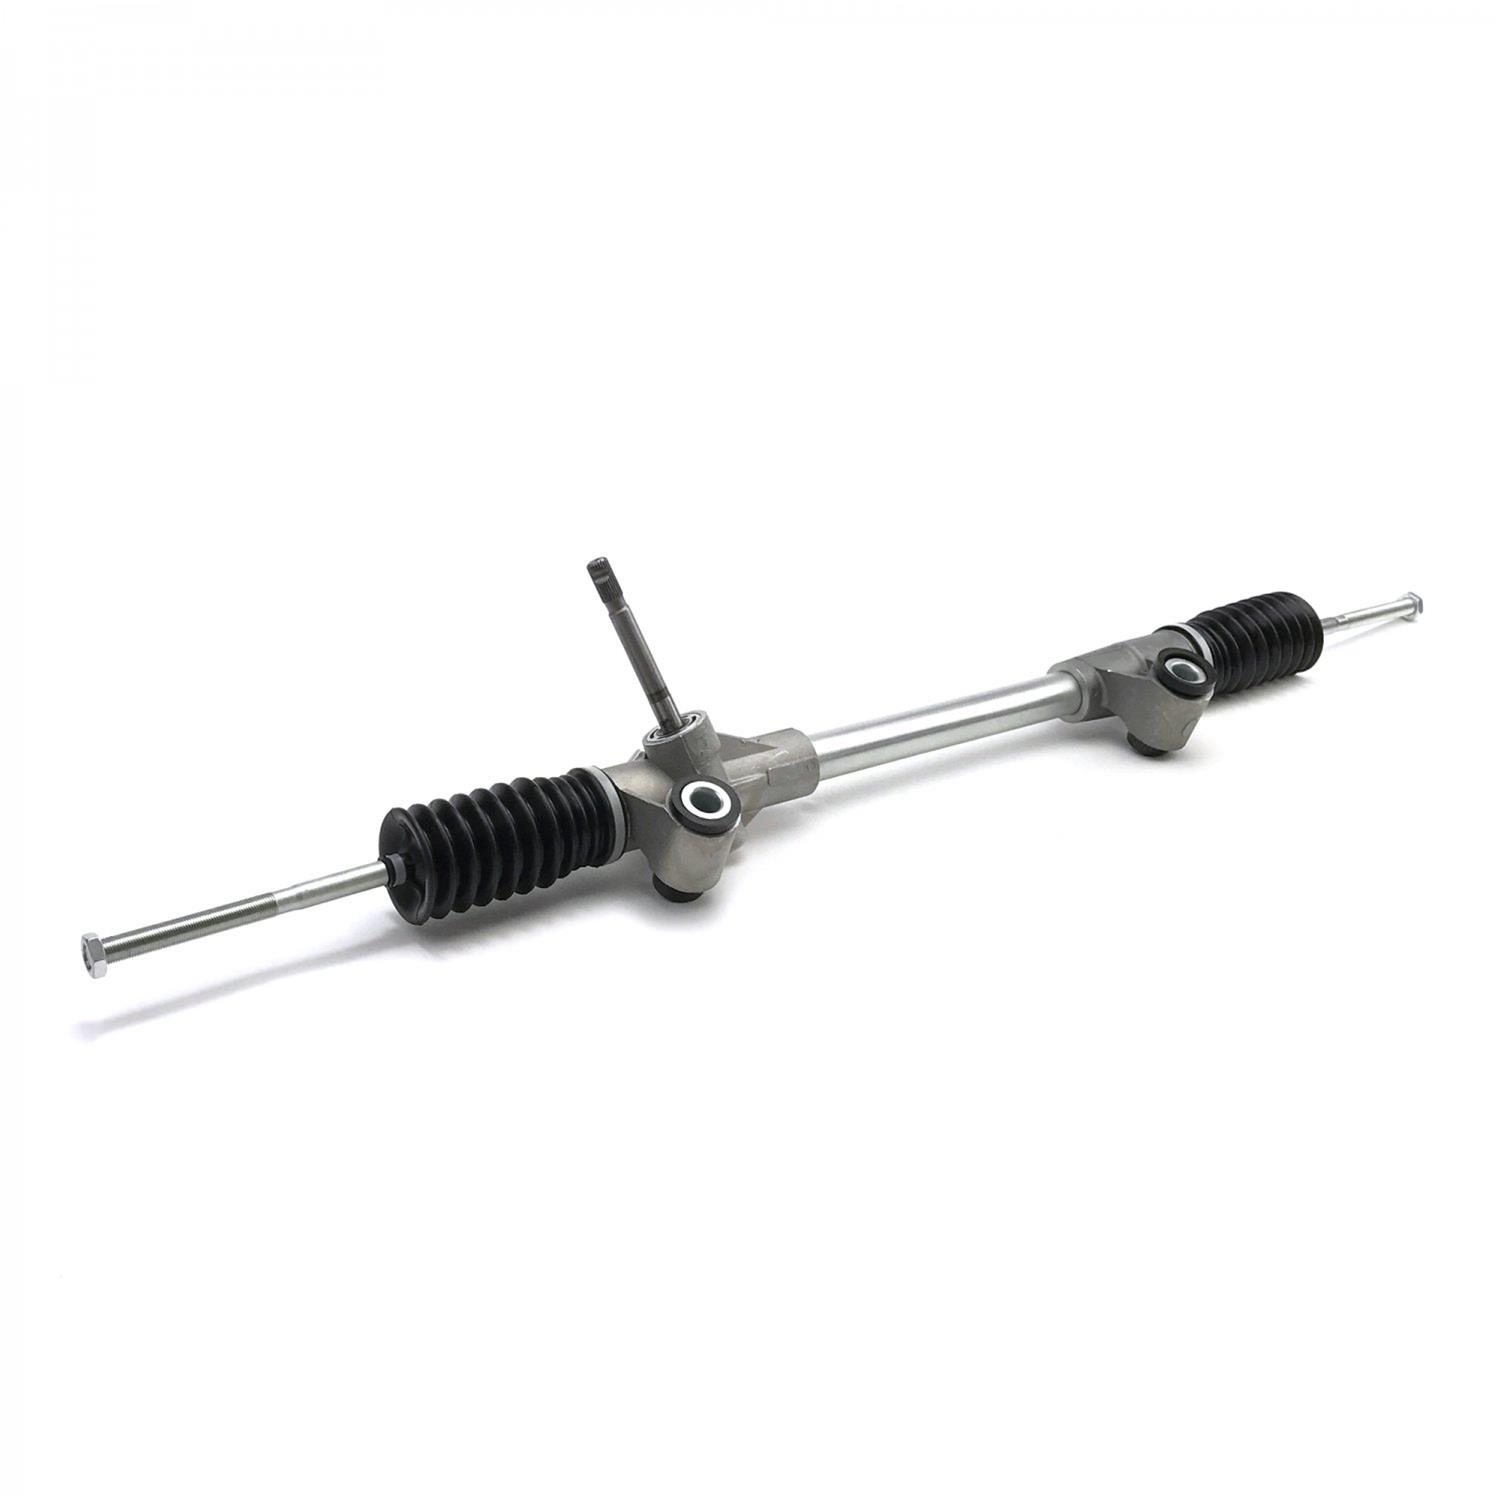 Mustang II Manual Steering Rack and Pinion with Tie Rod Ends and Hardware car